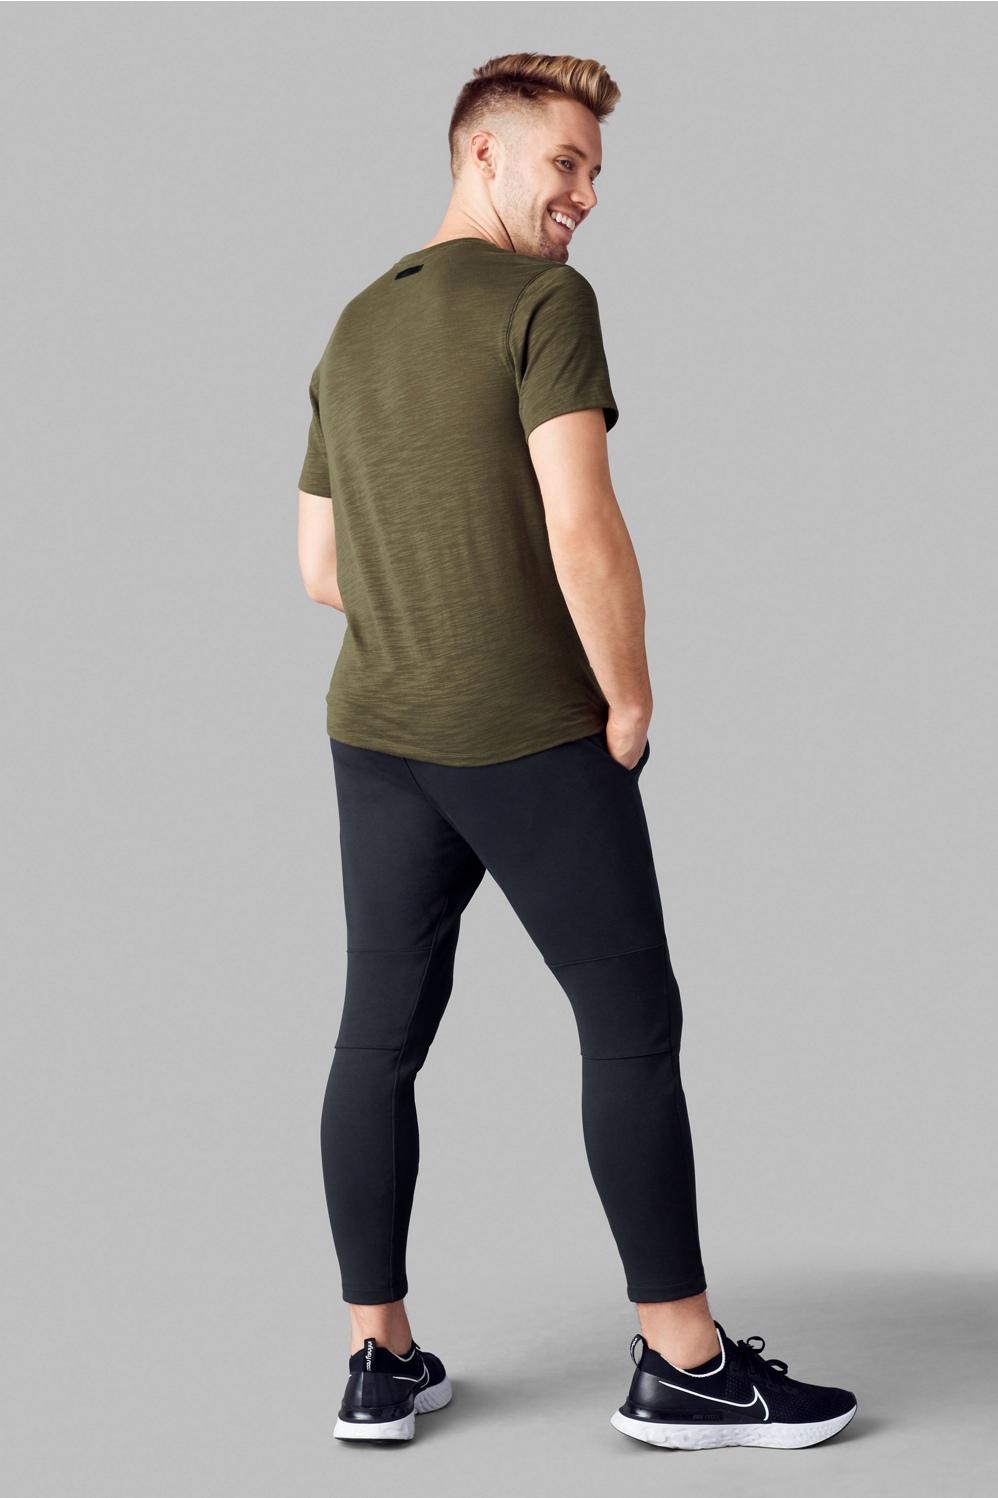 Fabletics Courtside Pant For Sale,Up To OFF 66%, 58% OFF